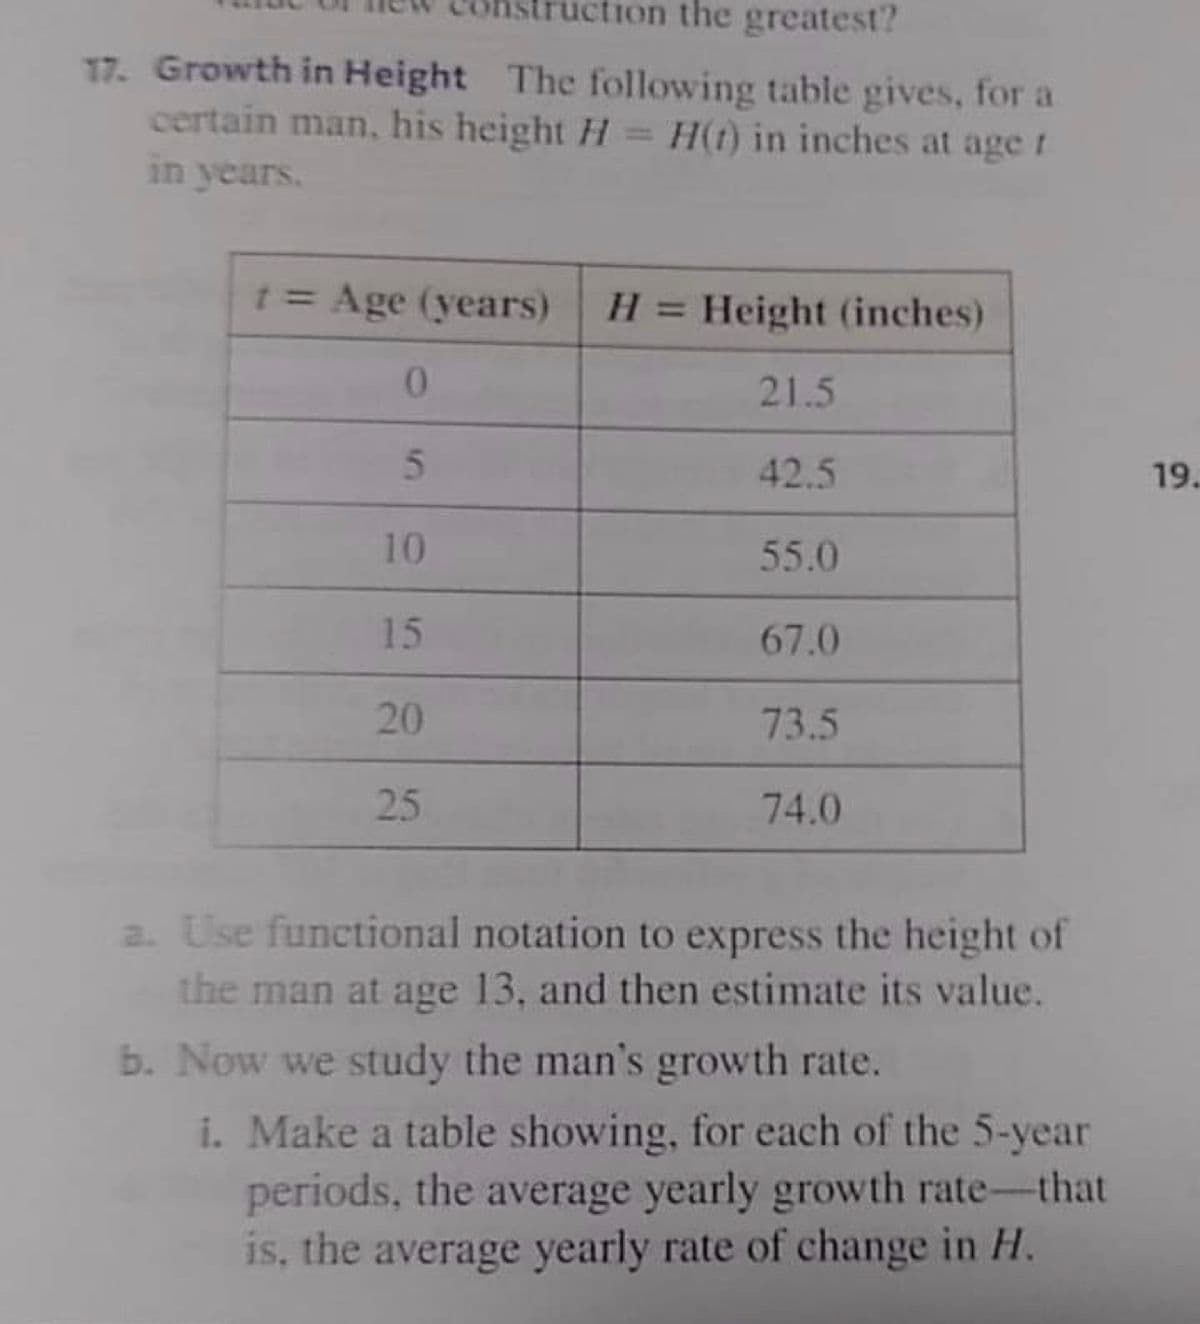 ton the greatest?
17. Growth in Height The following table gives, for a
certain man, his height H
in years.
H(t) in inches at age r
%3D
1= Age (years)
H = Height (inches)
%3D
21.5
42.5
19.
10
55.0
15
67.0
20
73.5
25
74.0
2. Use functional notation to express the height of
the man at age 13, and then estimate its value.
b. Now we study the man's growth rate.
i. Make a table showing, for each of the 5-year
periods, the average yearly growth rate-that
is, the average yearly rate of change in H.
